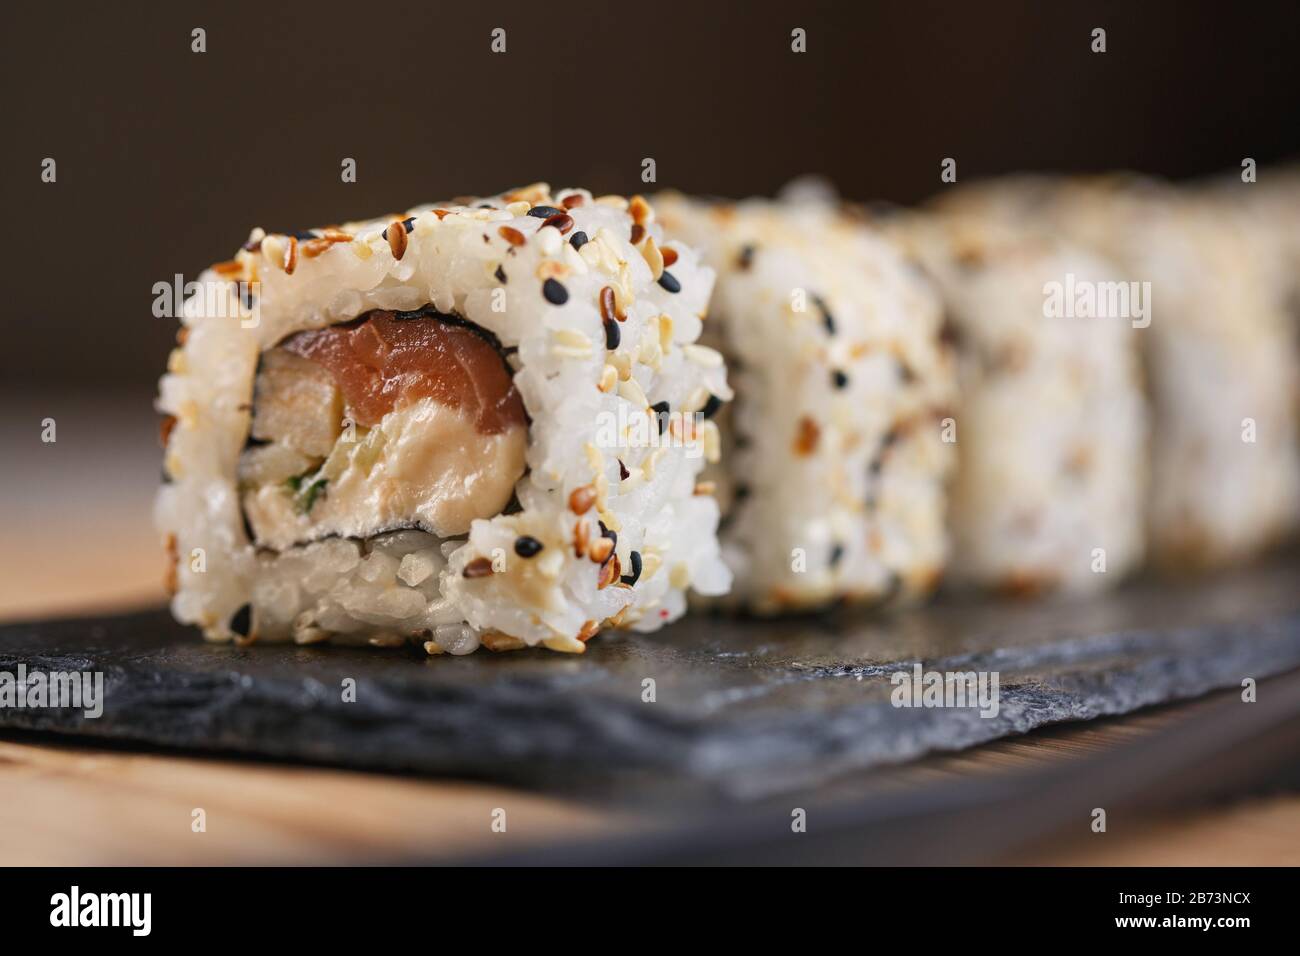 Sushi roll with salmon, eel, cucumber, cream cheese and sesame on a black board. Japanese food. Stock Photo